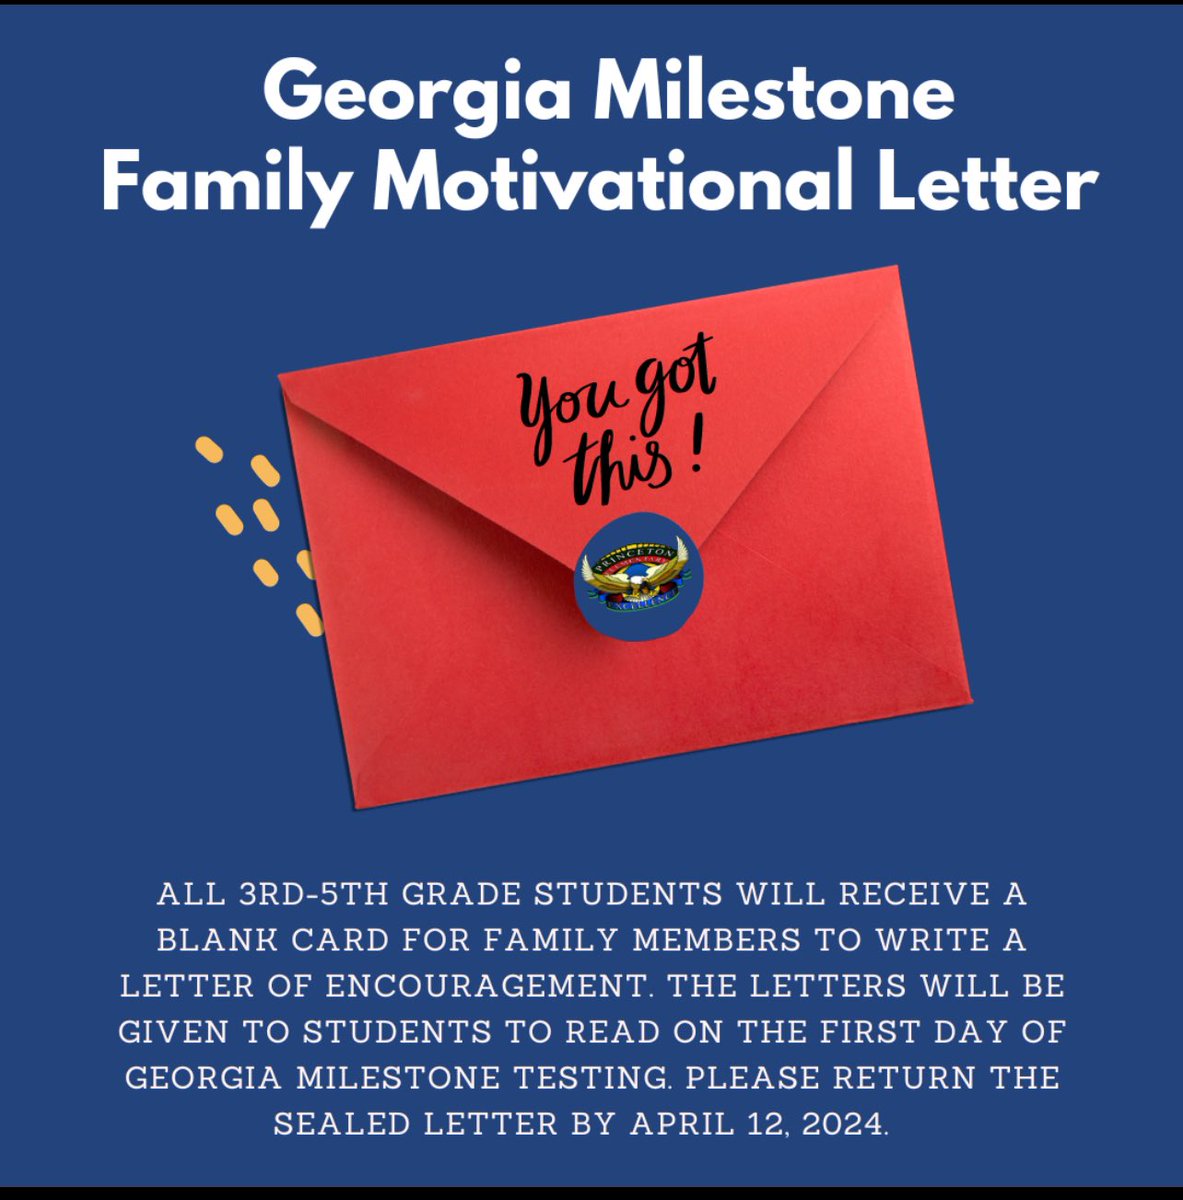 🦅 @PES_DCSD families! All 3rd-5th grade students will receive a blank card for family members to write a ✉️ of encouragement. The ✉️ will be given to students to read on the first day of GMAS testing (4/17). 😊@DeKalbSchools @McMillansCorner @YouKnowMrSmith5